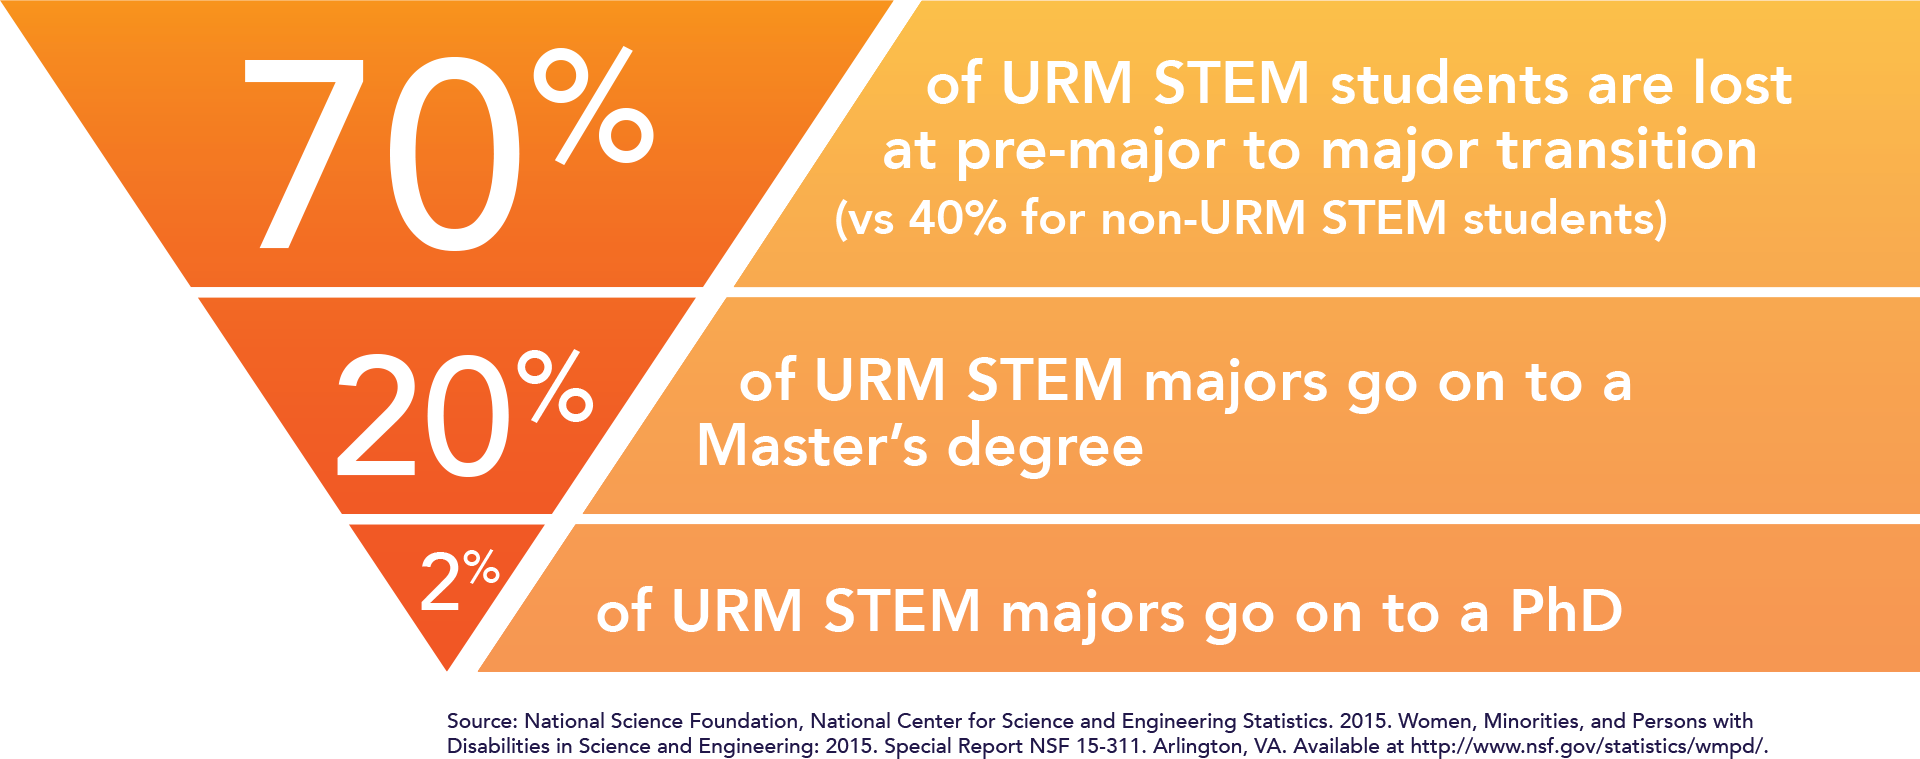 70 percent of URM STEM students are lost at pre-major to major transition (vs 40 percent for non-URM STEM students). 20 percent of URM STEM majors go on to a Master’s degree.  2 percent of URM STEM majors go on to a PhD.